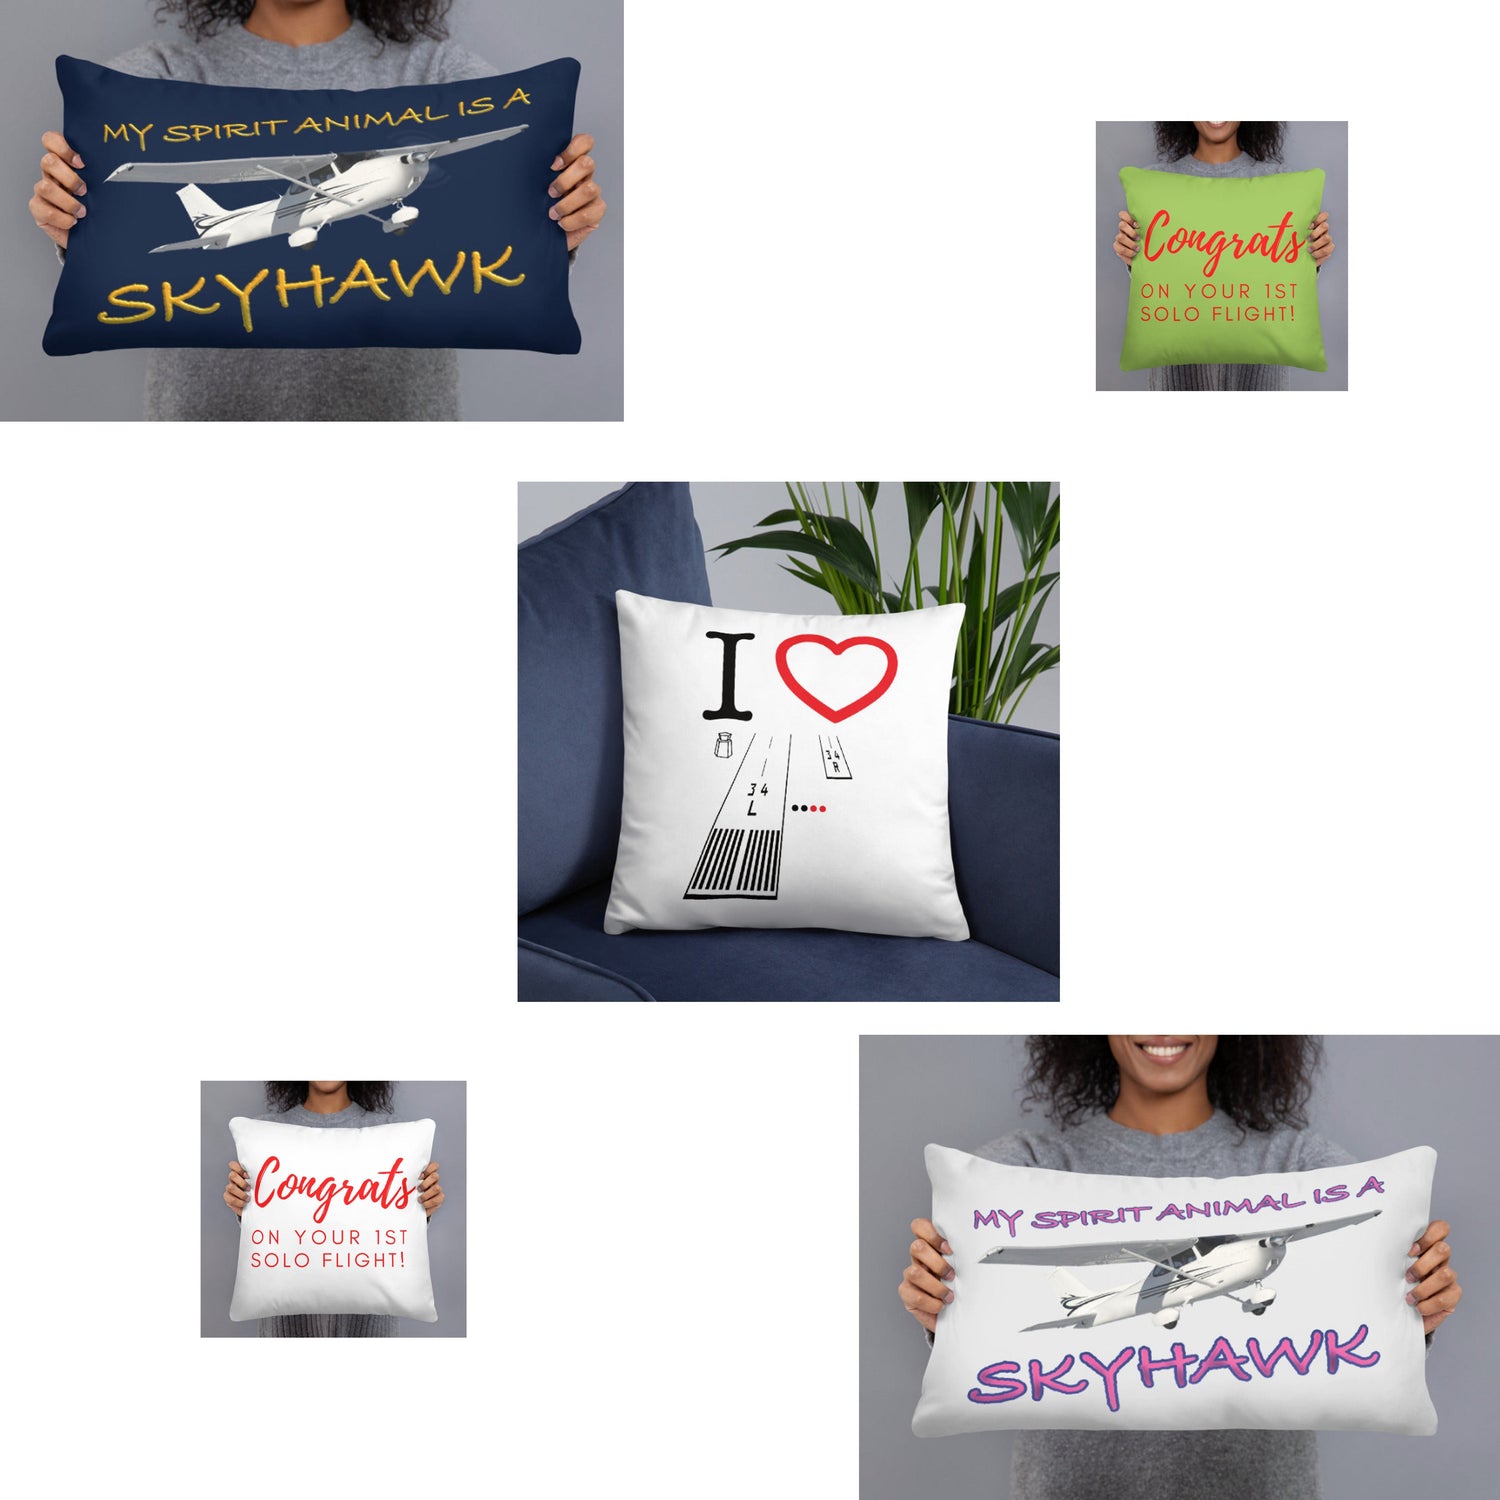 Aviation themed pillows in 18"x18" and 20"x12" sizes